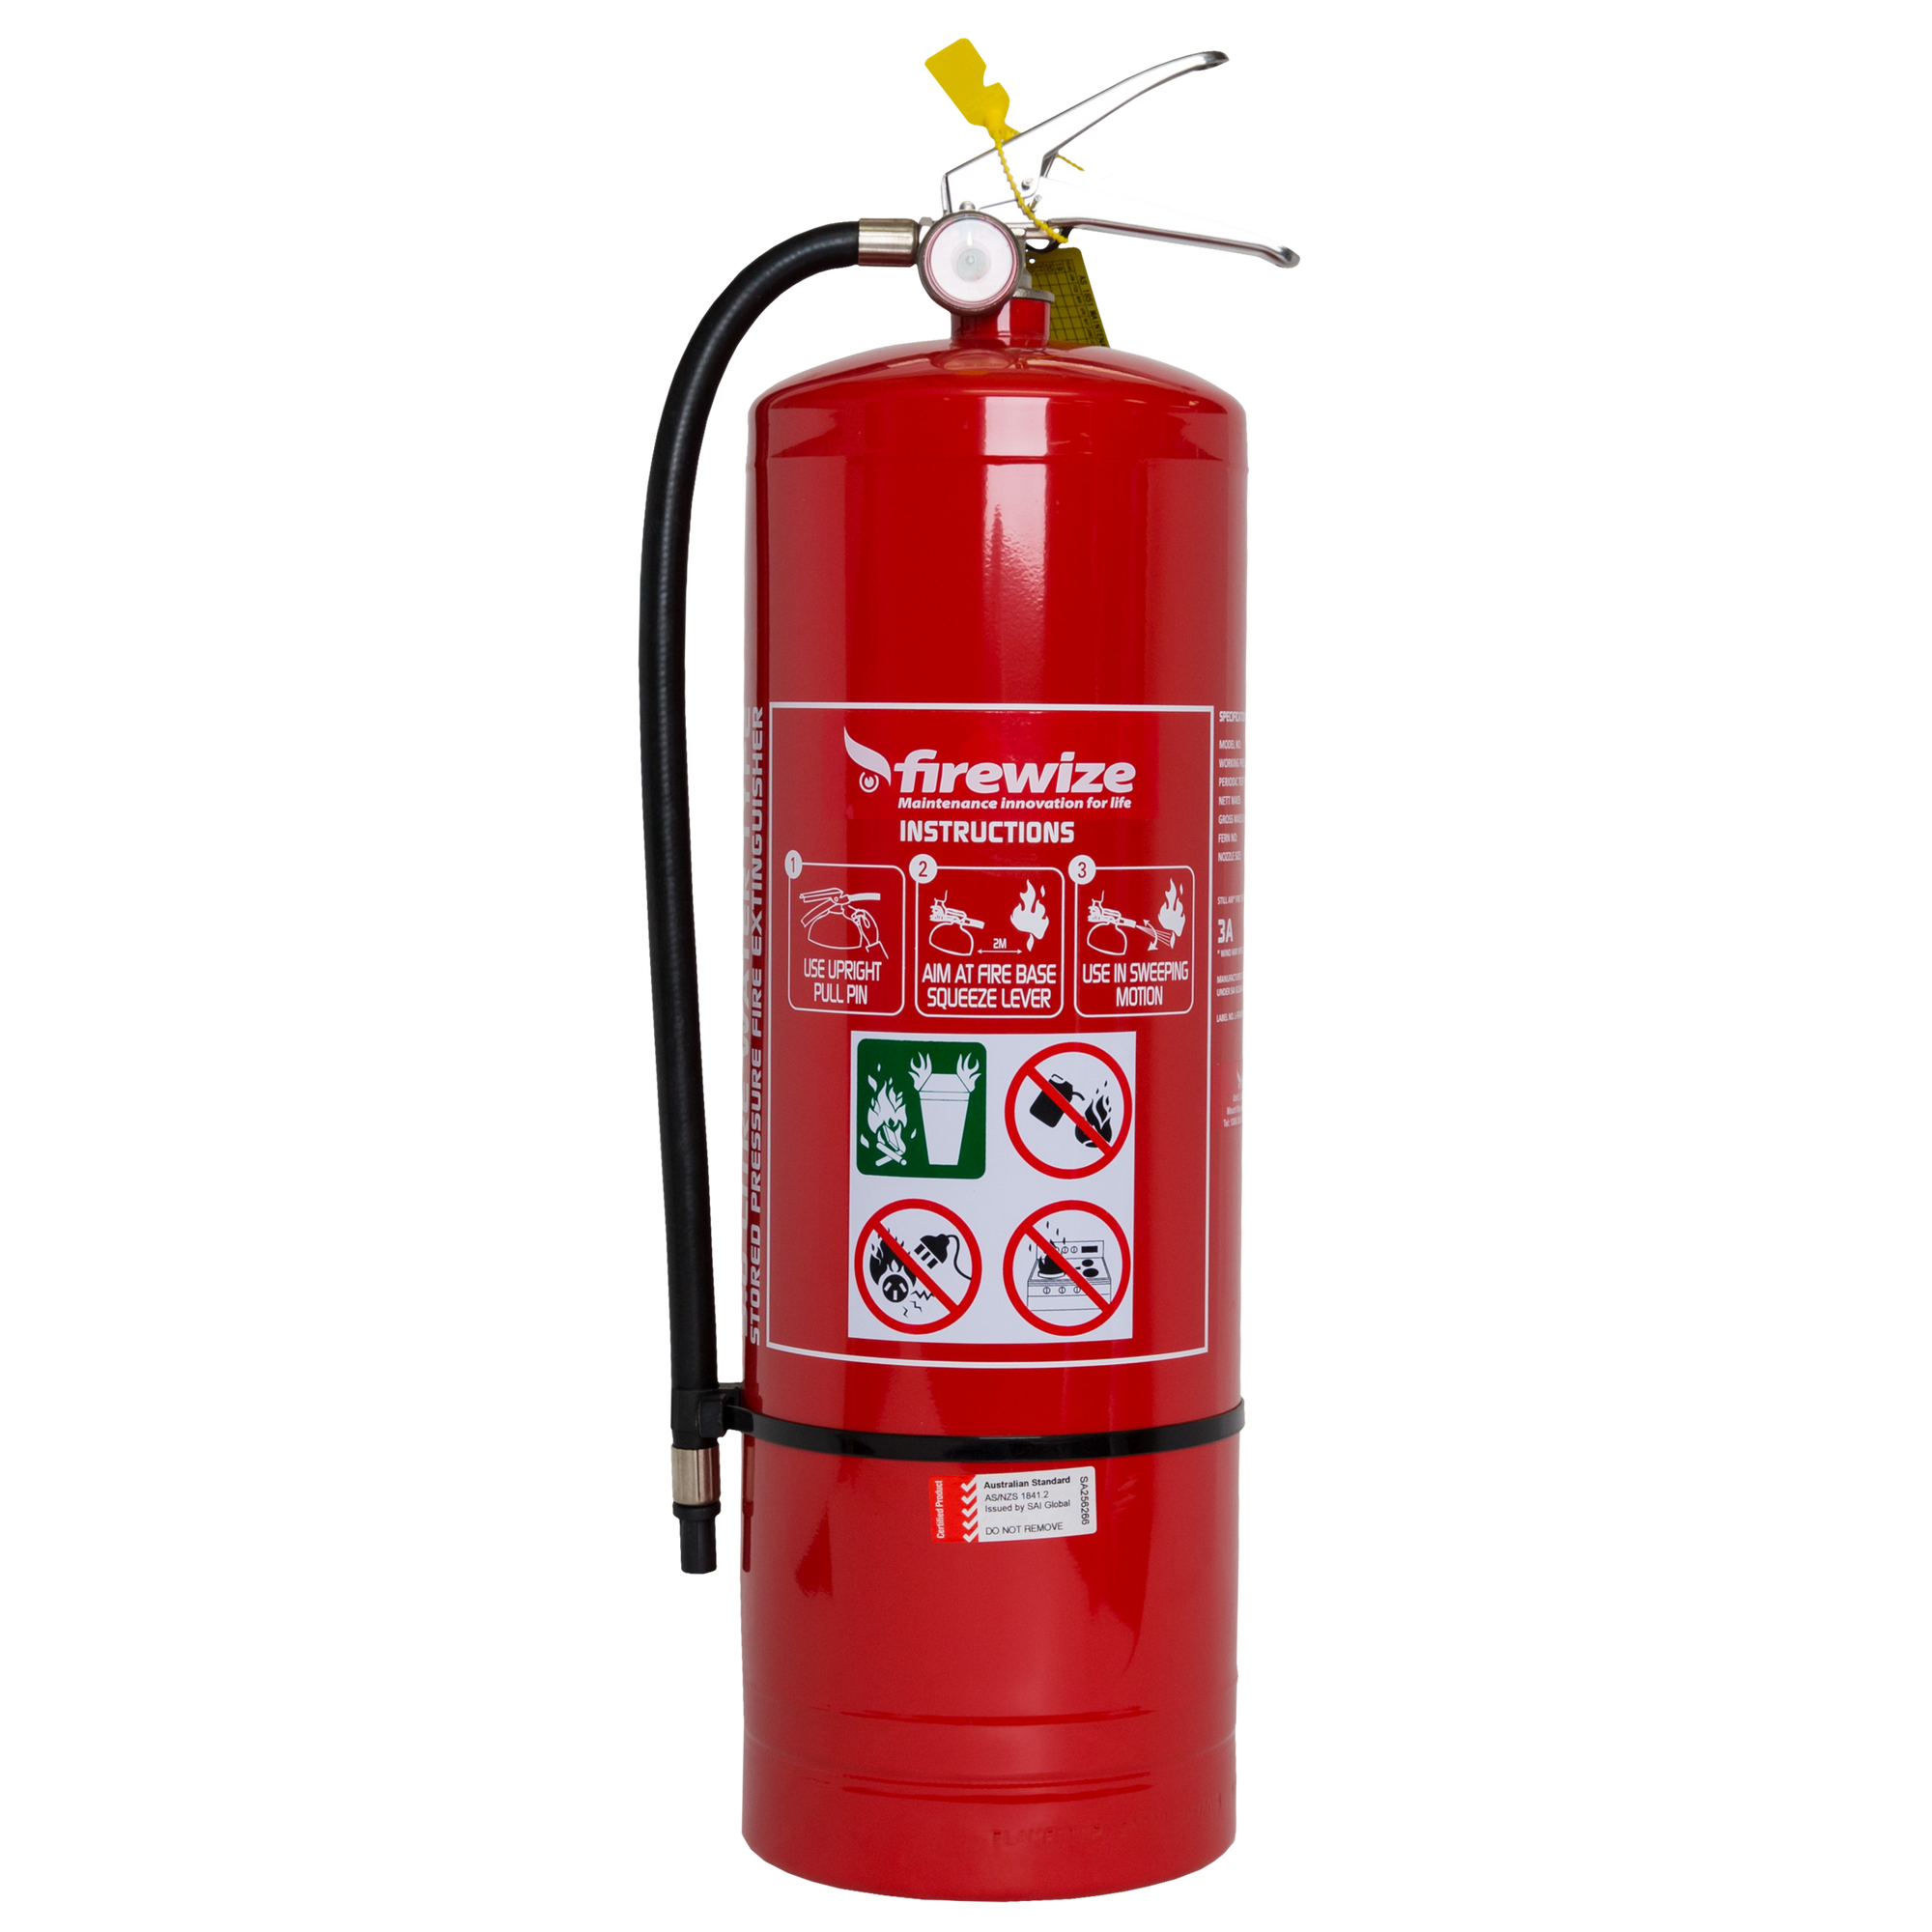 Air Water AW 9.0lt fire extinguisher